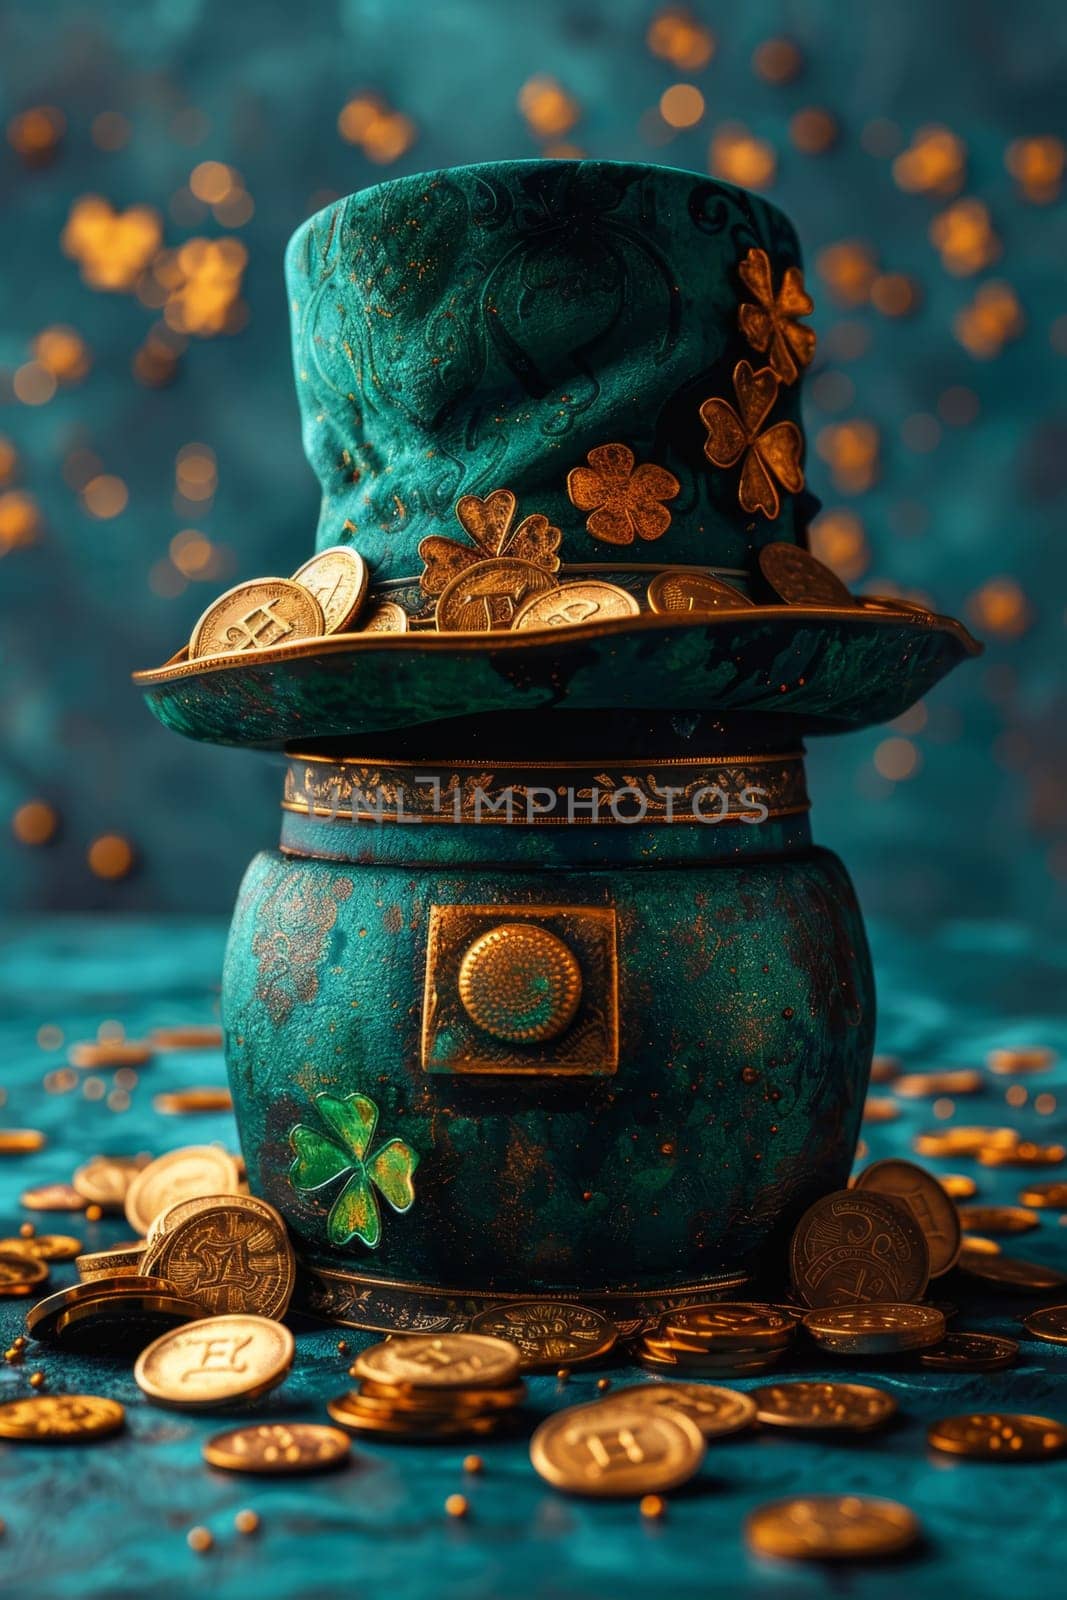 A green Leprechaun hat and gold coins stand out lying on the surface. St. Patrick's Day by Lobachad